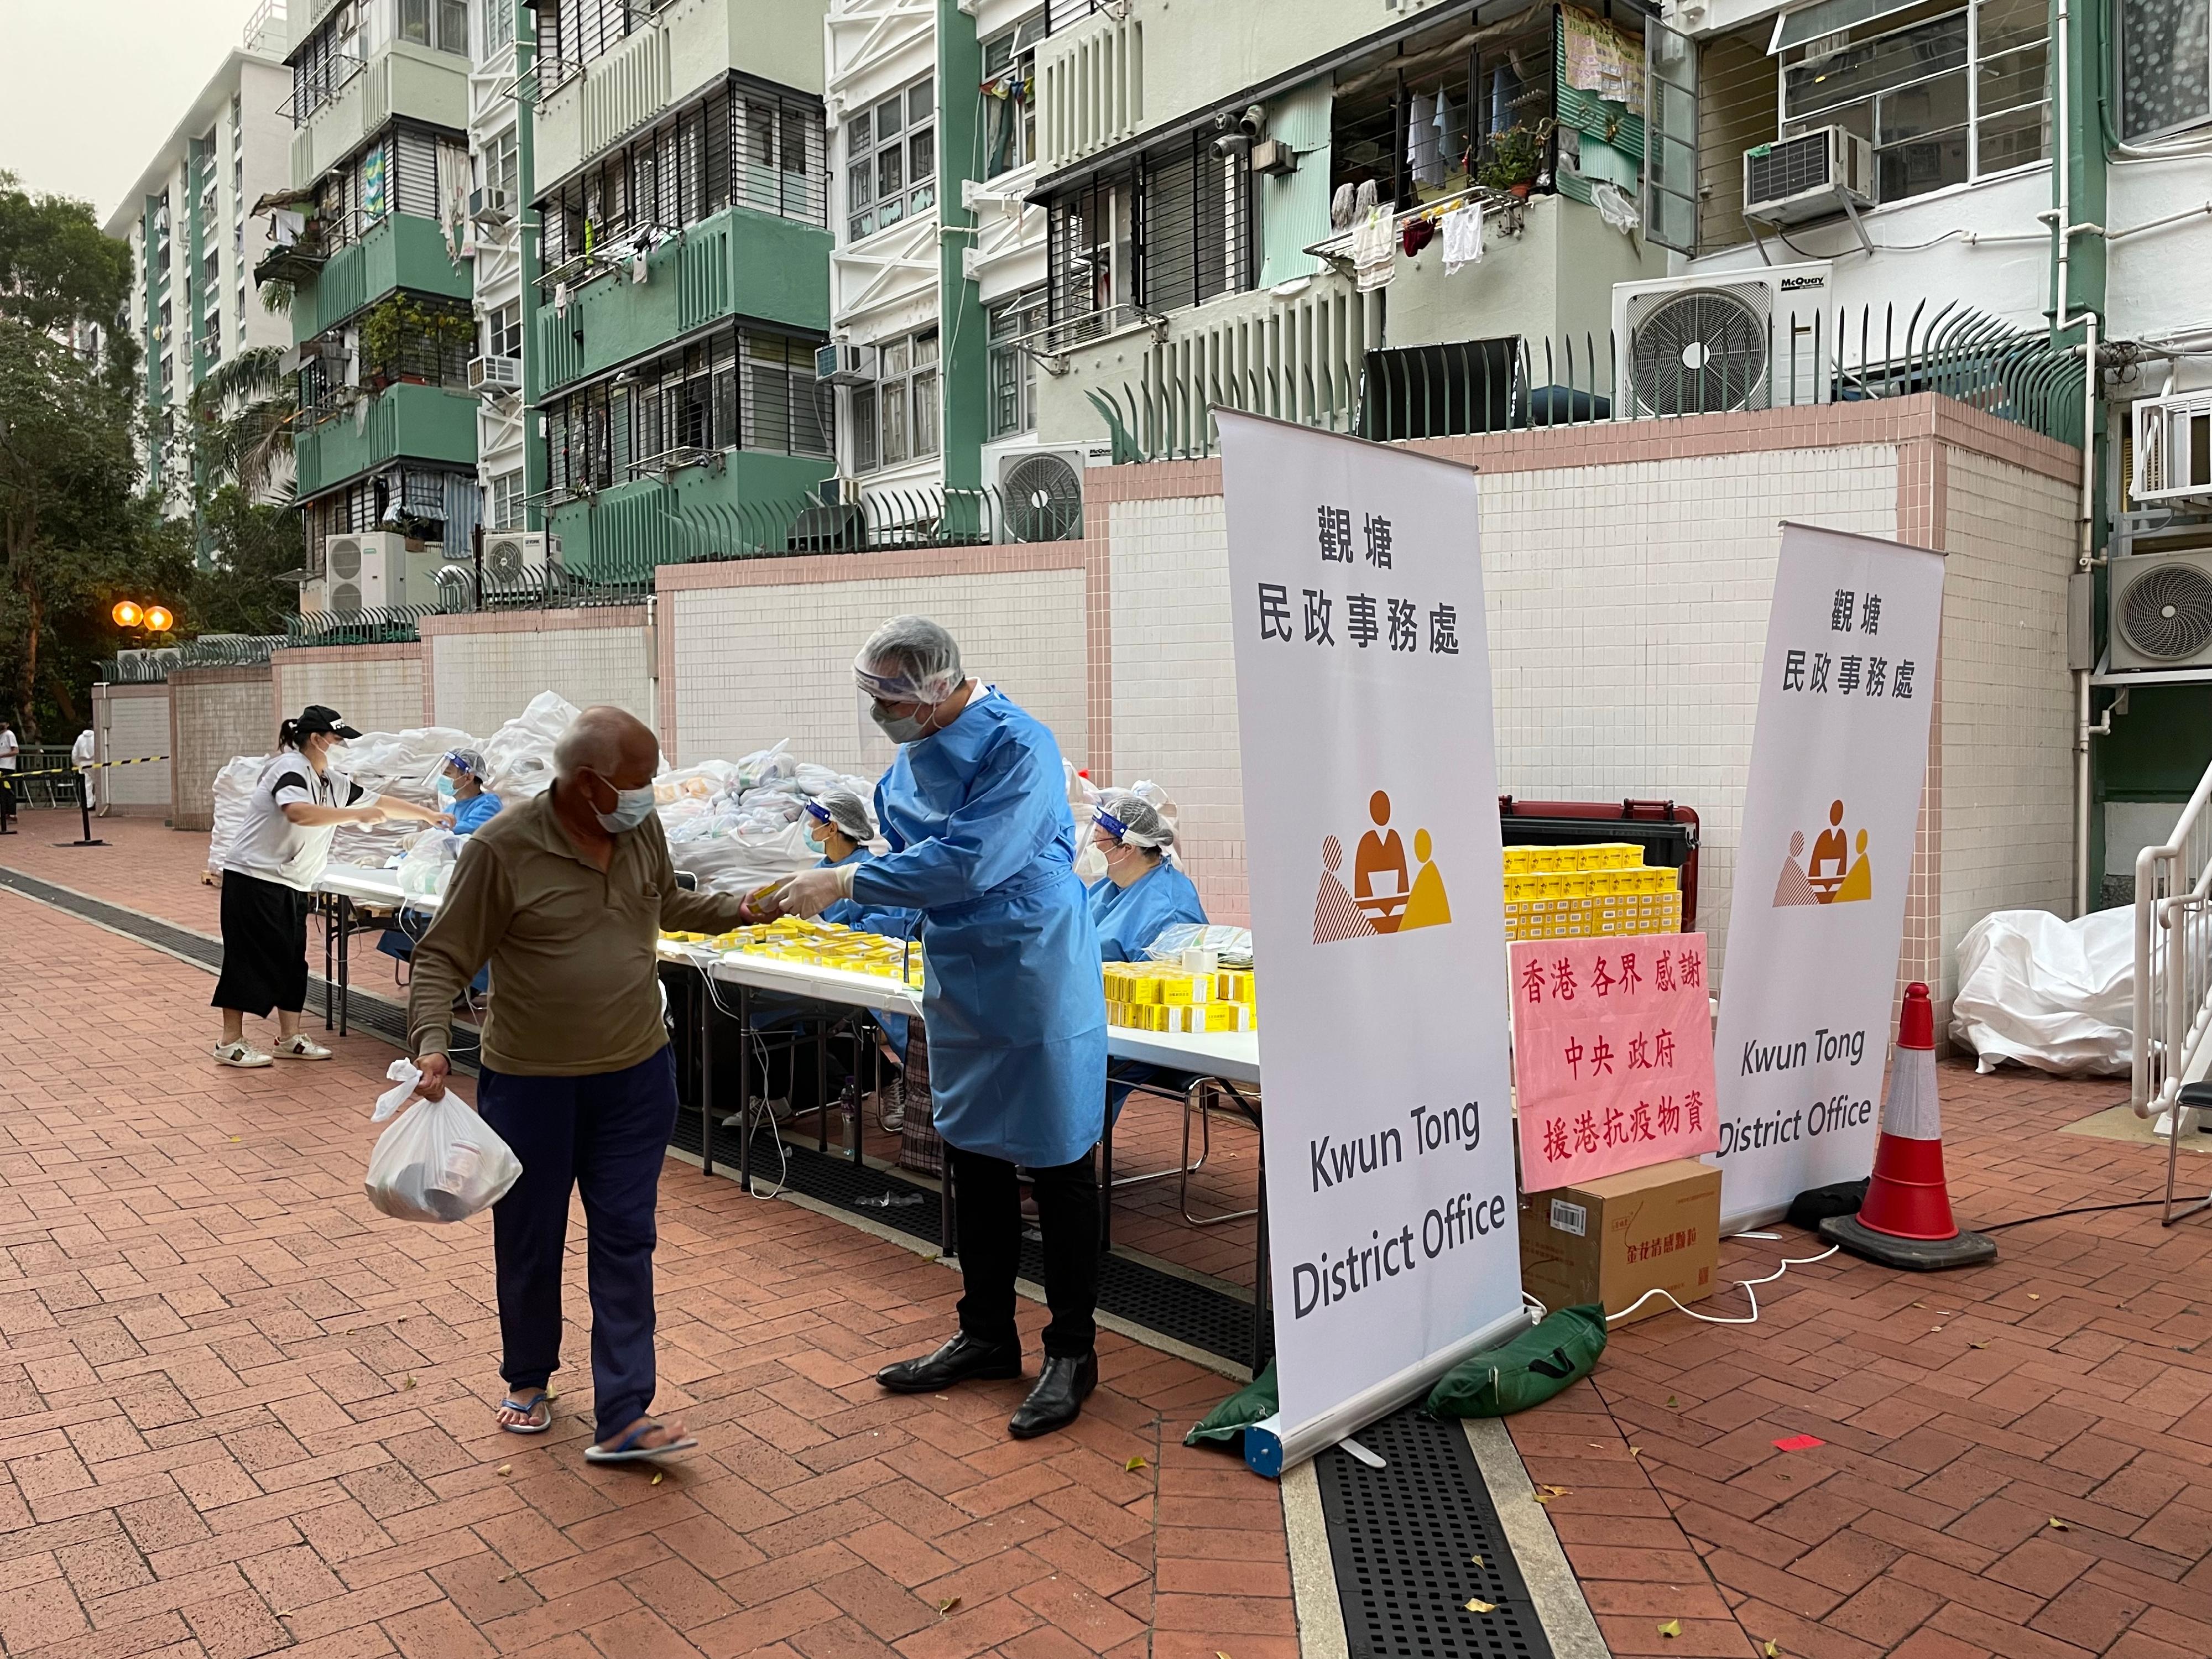 The Government yesterday (March 18) made a "restriction-testing declaration" and issued a compulsory testing notice in respect of the specified "restricted area" in Kwun Tong (i.e. Ping On House, Tai On House and Yee On House, Wo Lok Estate, Kwun Tong, excluding units 1-14 and Wo Lok Estate Office on G/F.), under which people within the specified "restricted area" in Kwun Tong were required to stay in their premises and undergo compulsory testing. Photo shows the District Officer (Kwun Tong), Mr Steve Tse, distributing anti-epidemic proprietary Chinese medicines supplied by the Central People's Government to a person subject to compulsory testing in the "restricted area".